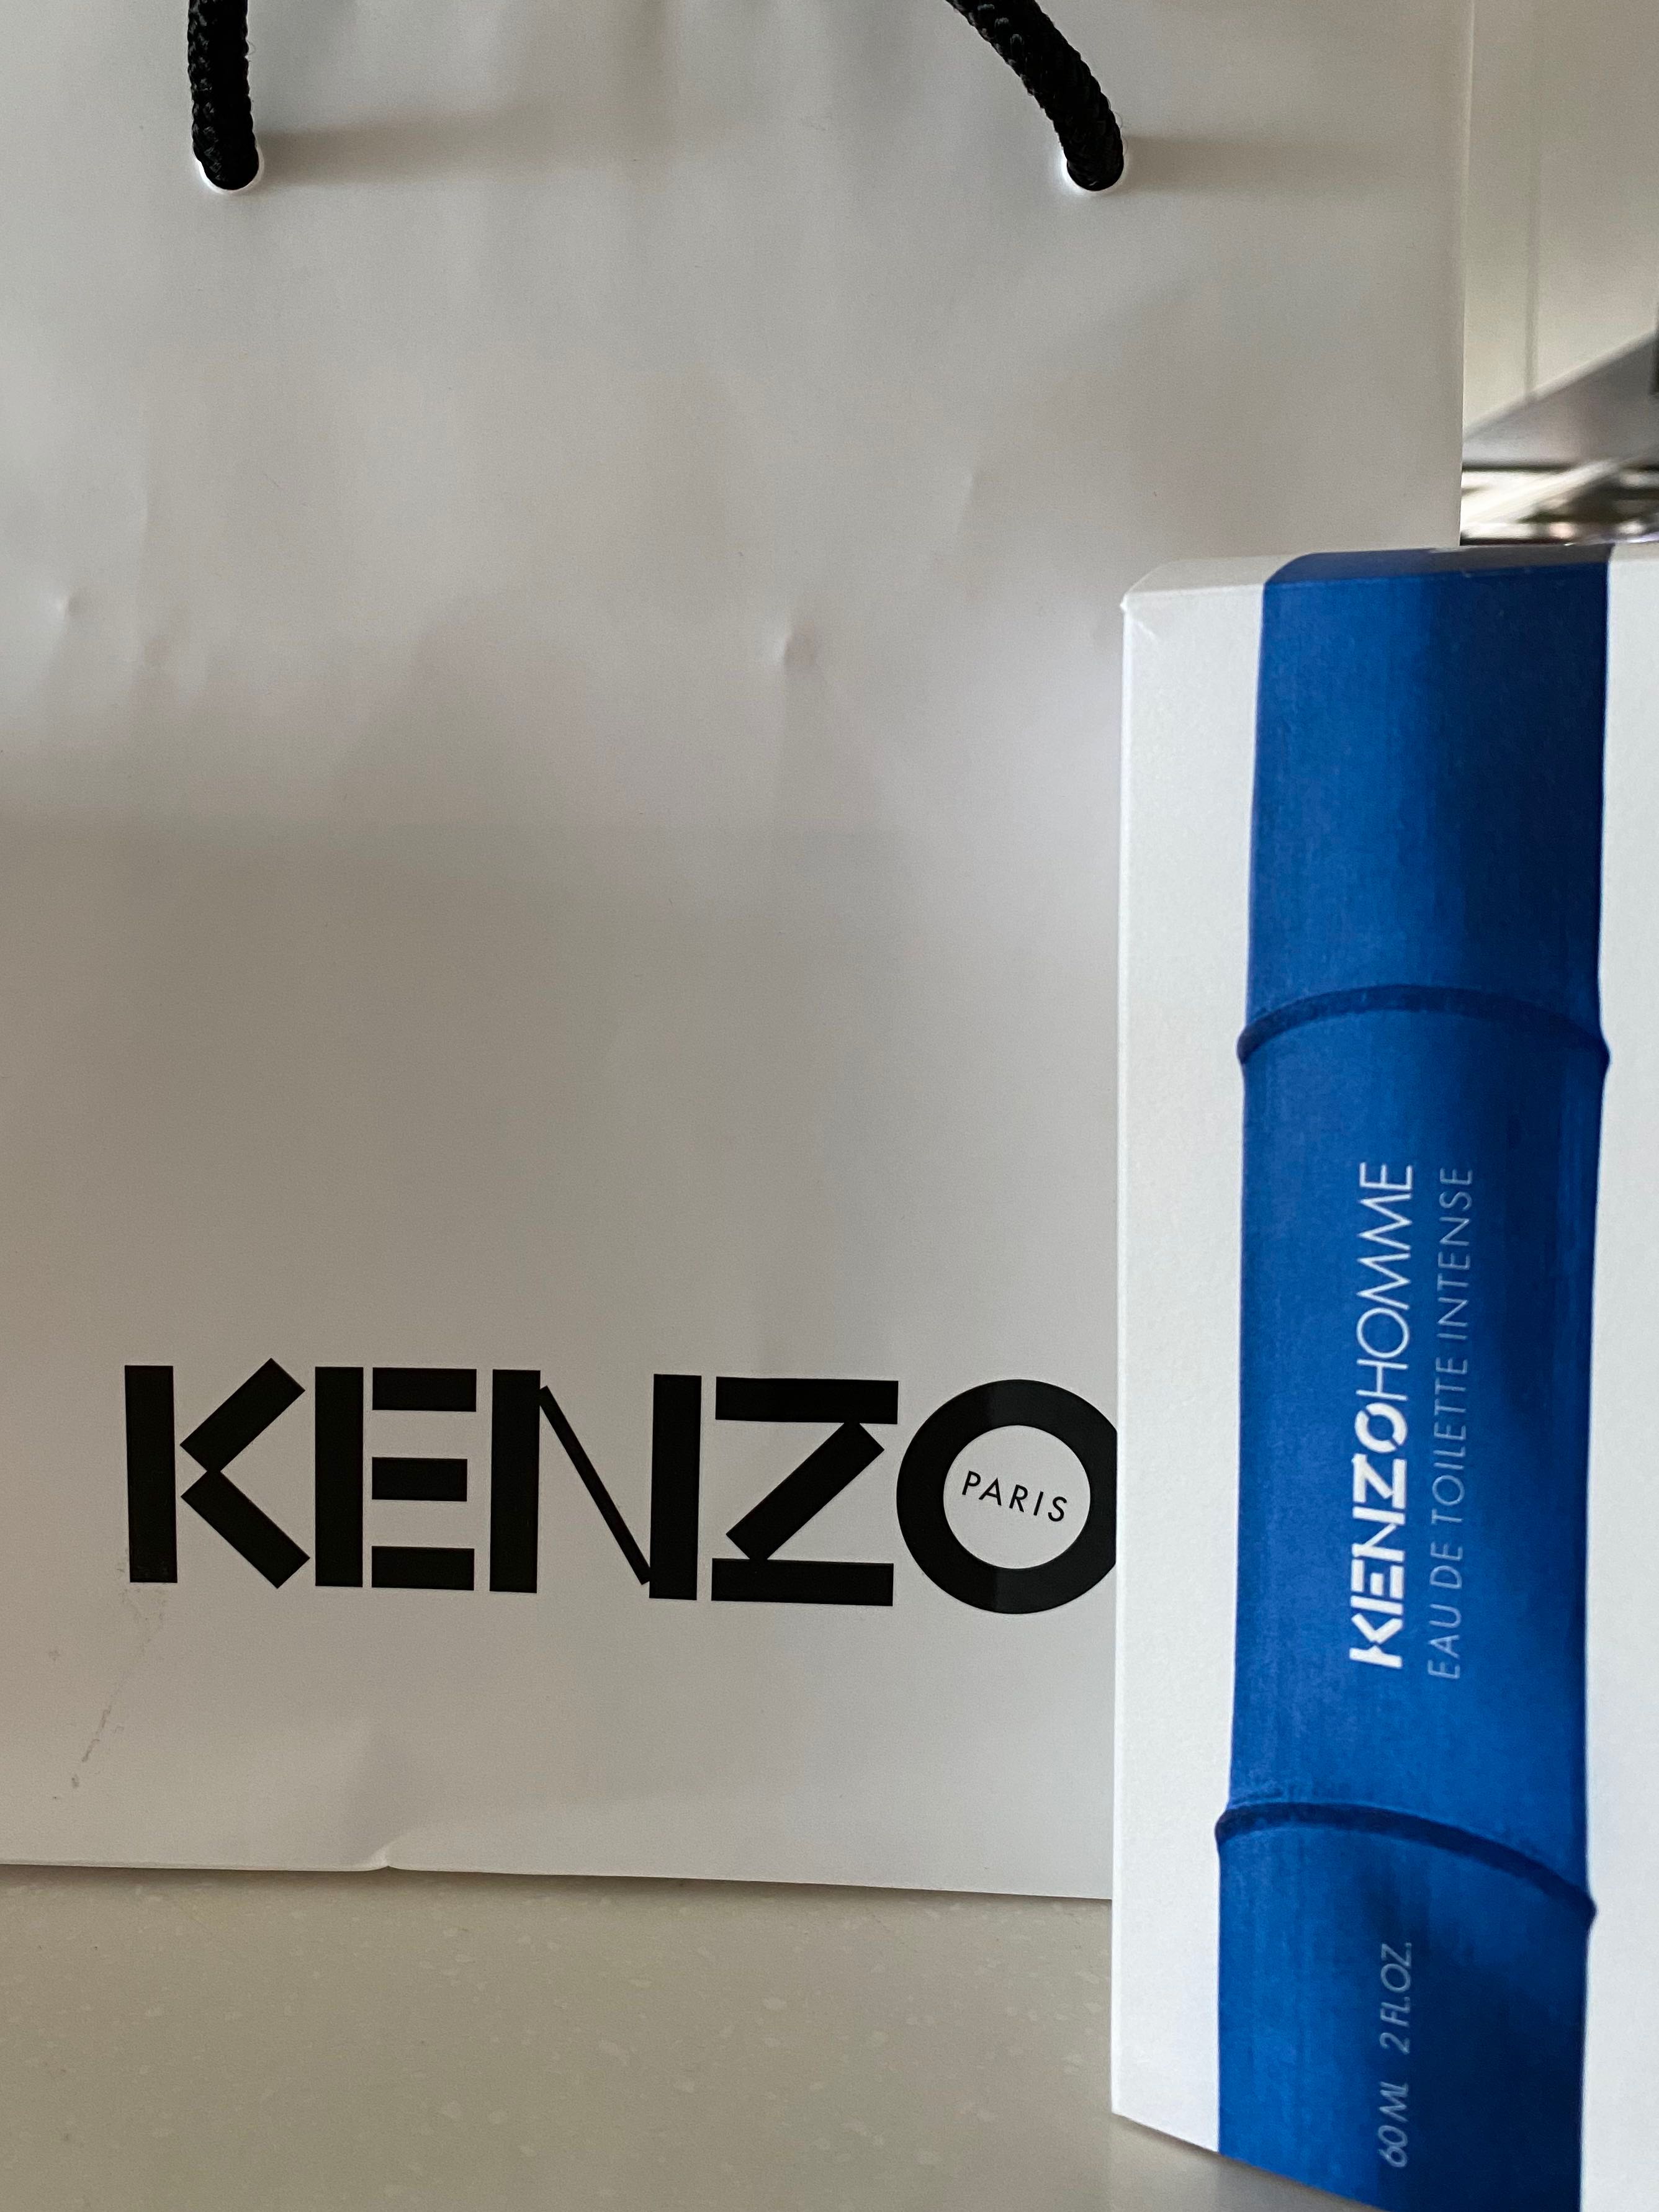 Kenzo Homme EDP & Homme Intense EDT review 